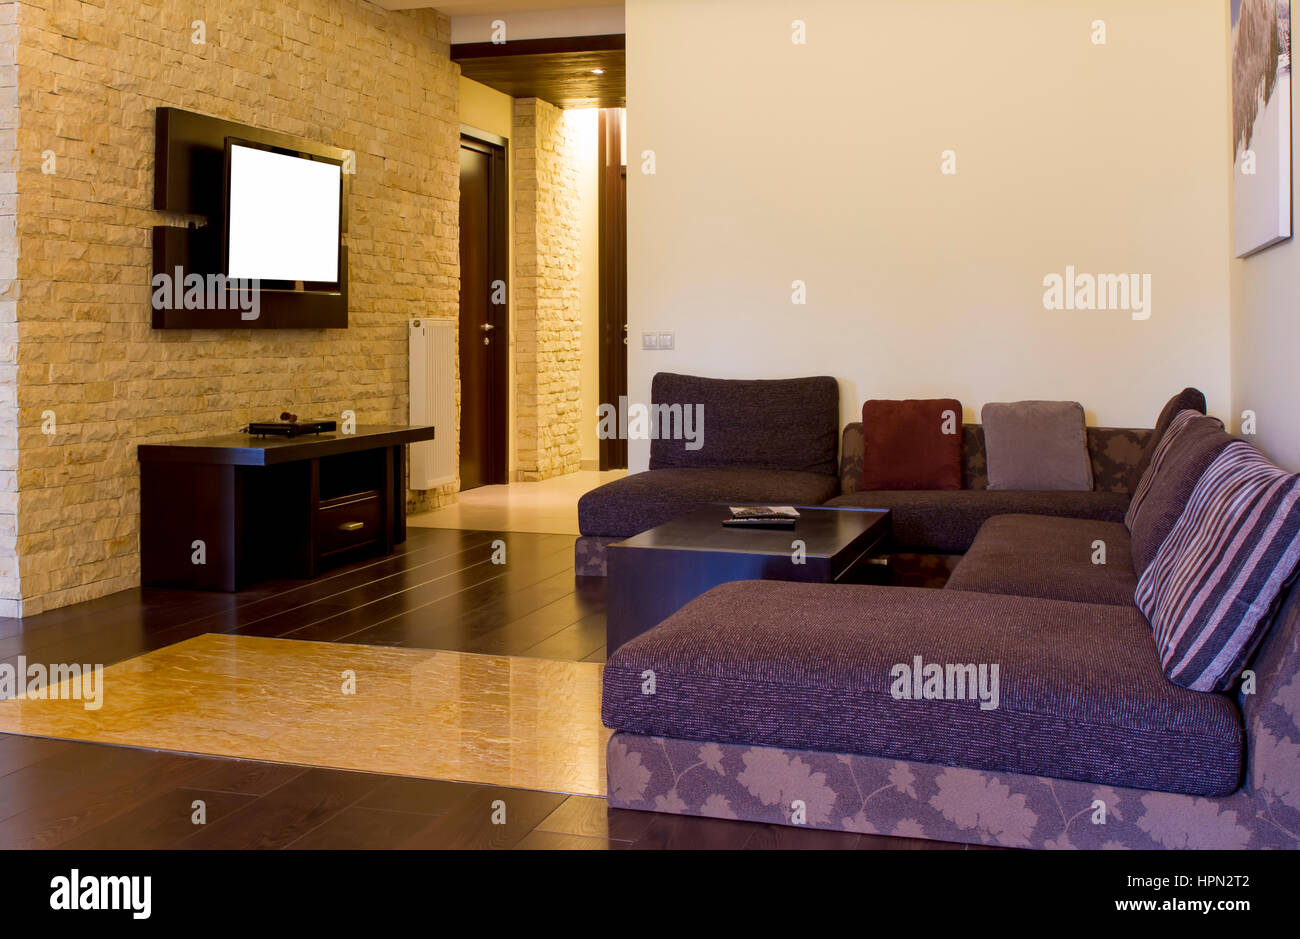 Living room modern style with tv on wall Stock Photo